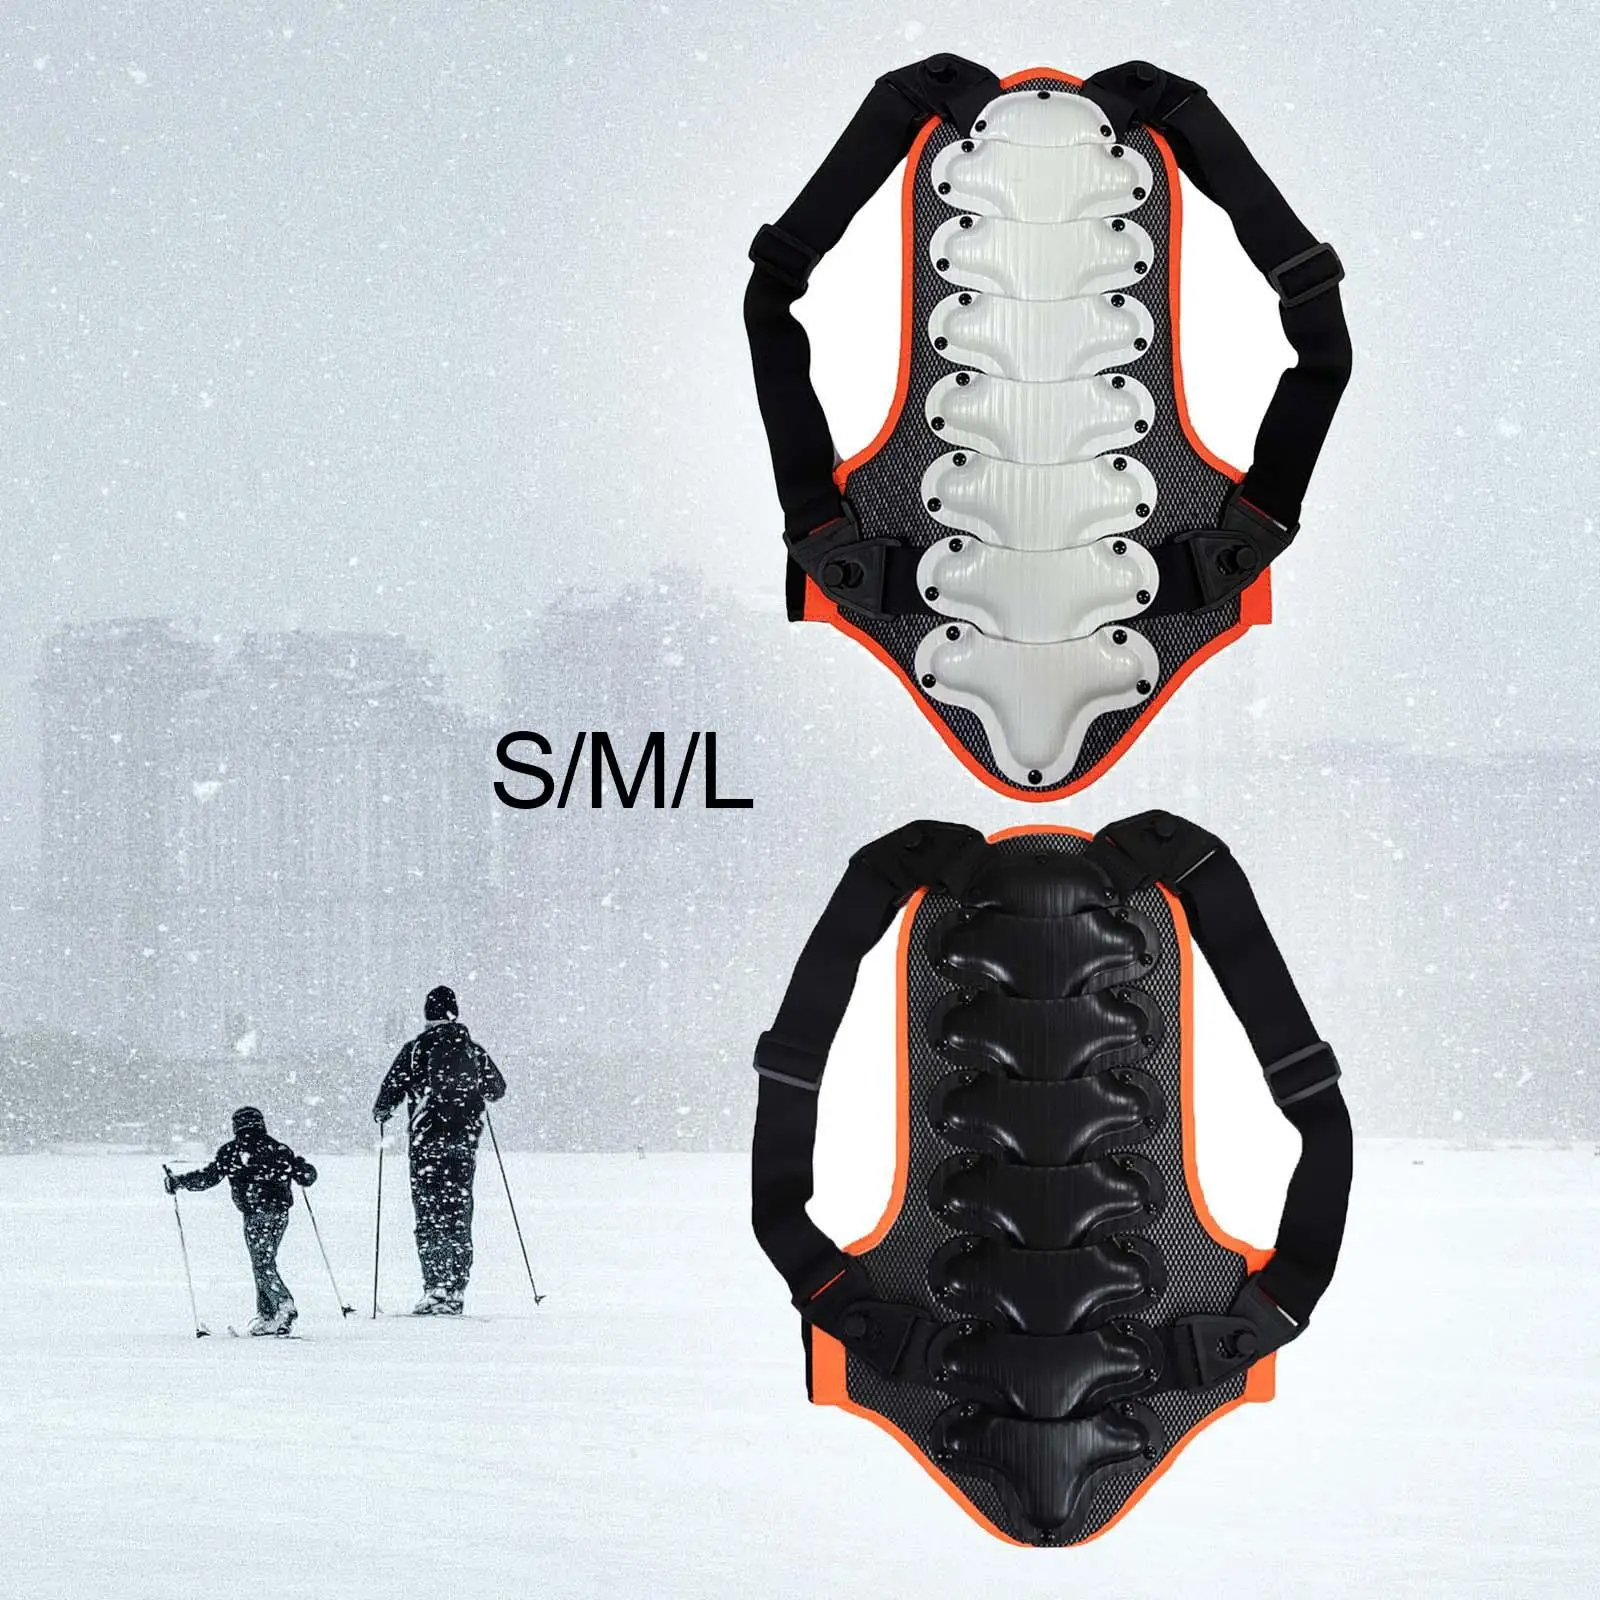 Children Back protector Cushion Protector guard Pad for Sports Riding Snowboarding Downhill Outdoor